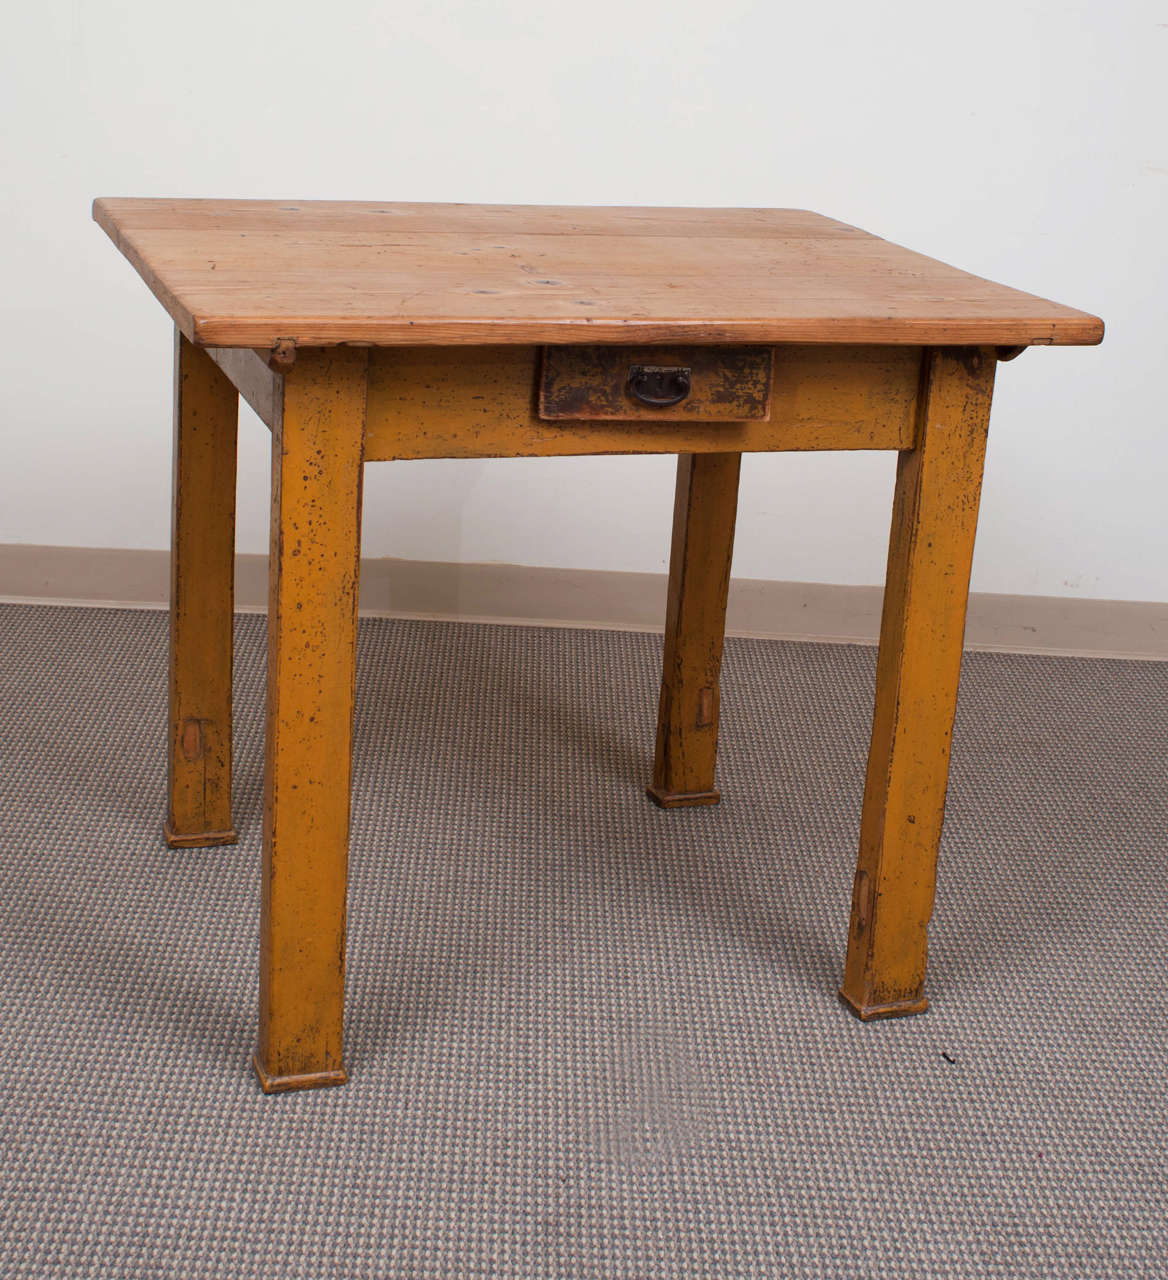 A small and very rustic table to add charm and character to any location.  The three board top is waxed to a rich warm brown and the base, on four straight legs, is in distressed mustard on barn red paint.  The front apron features a single central